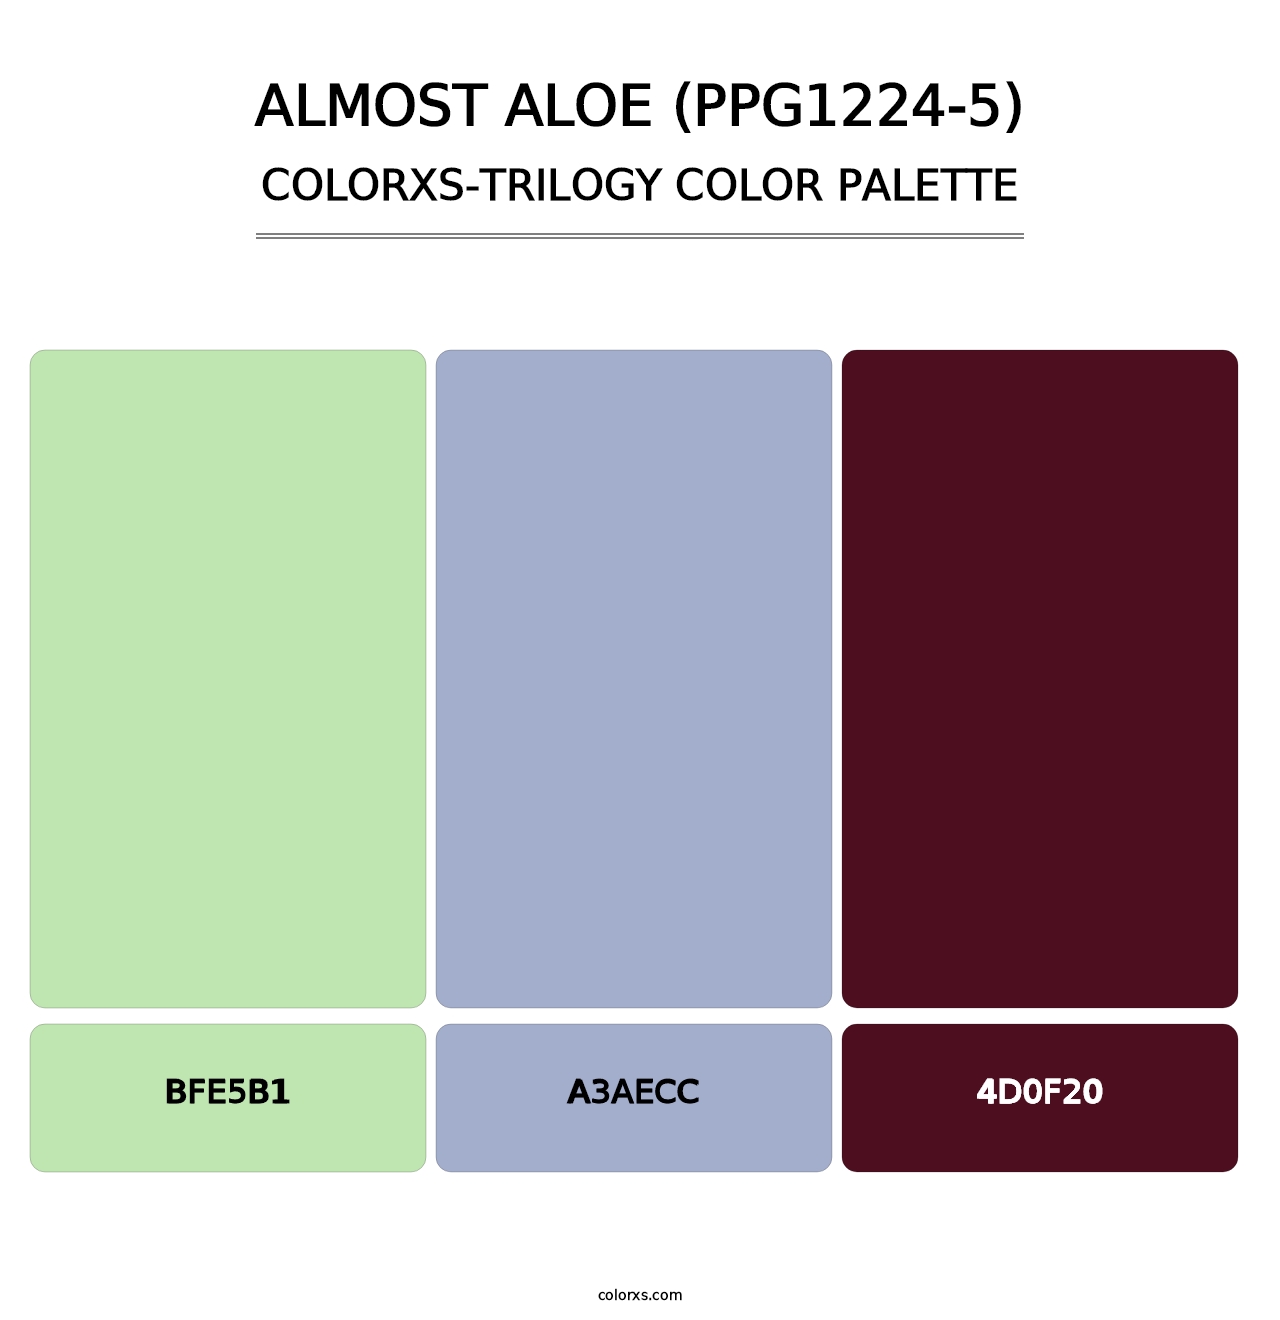 Almost Aloe (PPG1224-5) - Colorxs Trilogy Palette